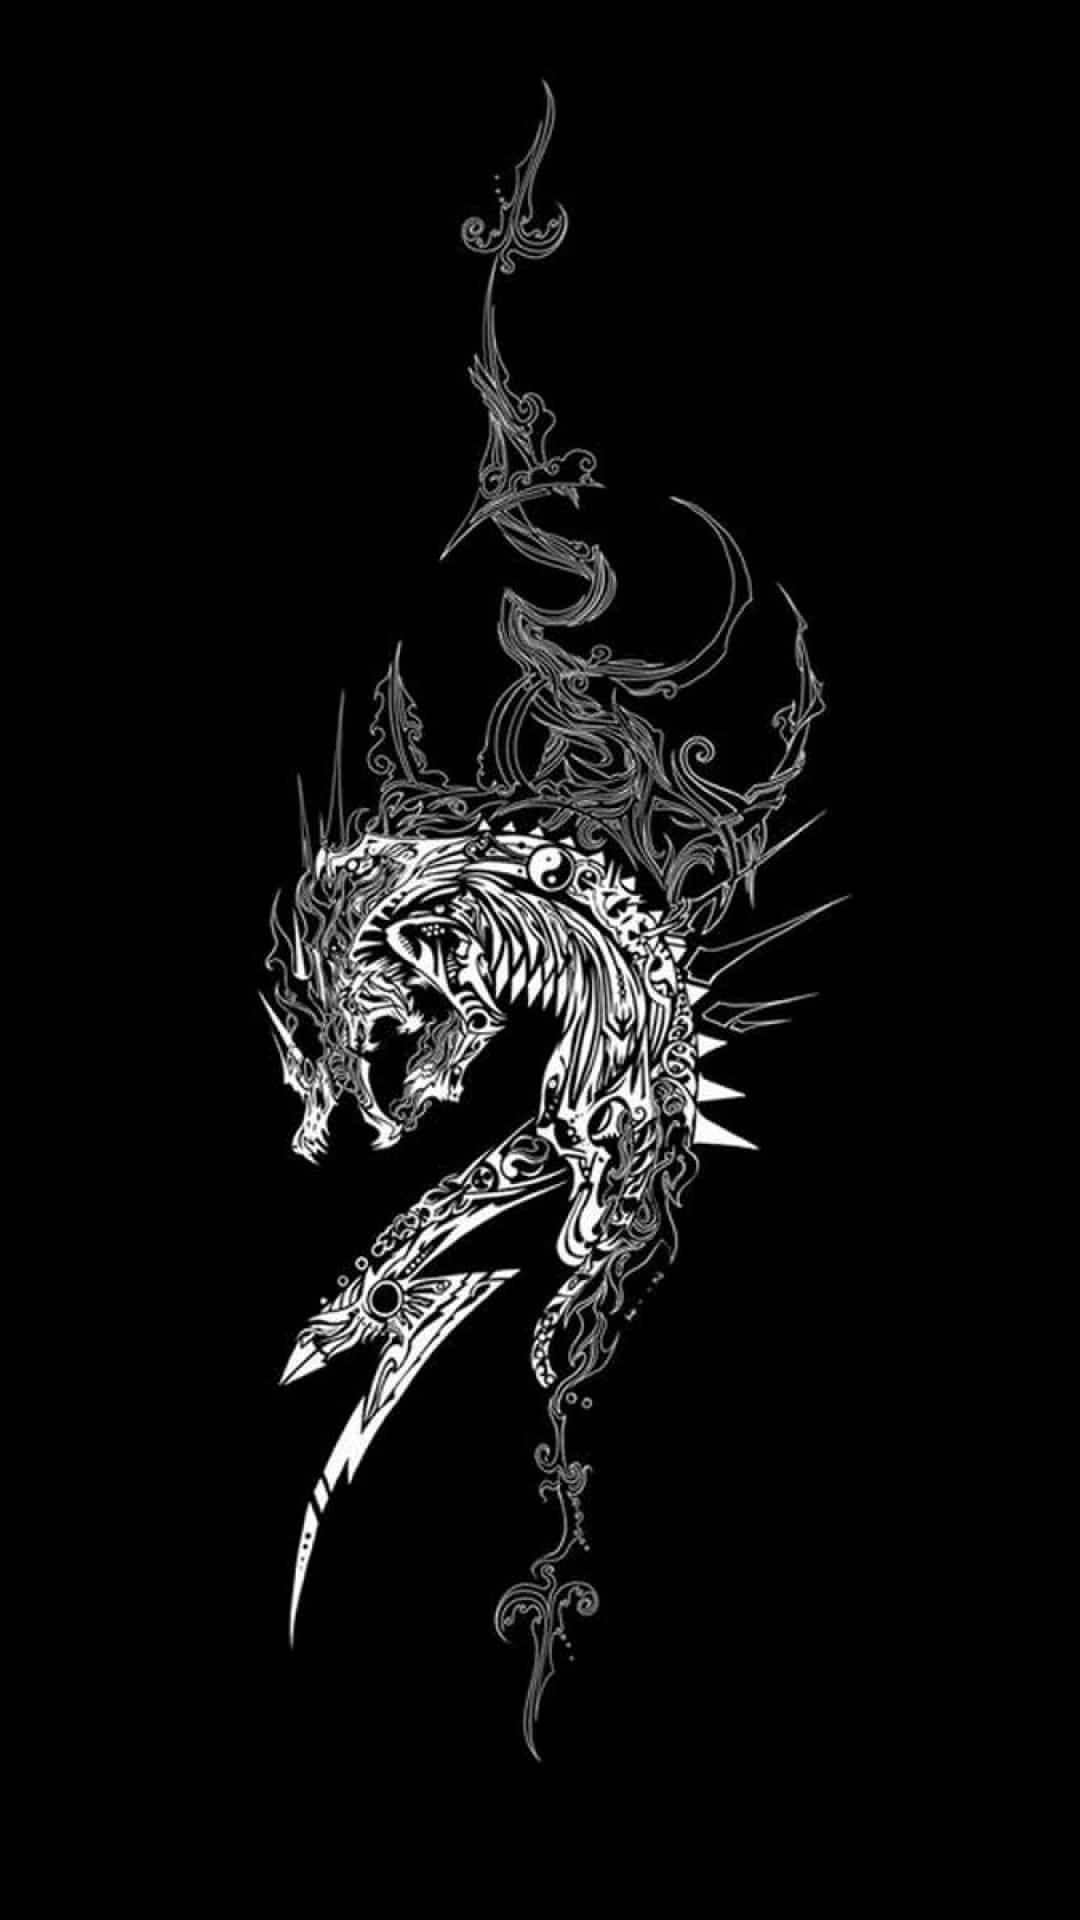 Japanese Dragon With Tribal Design Background